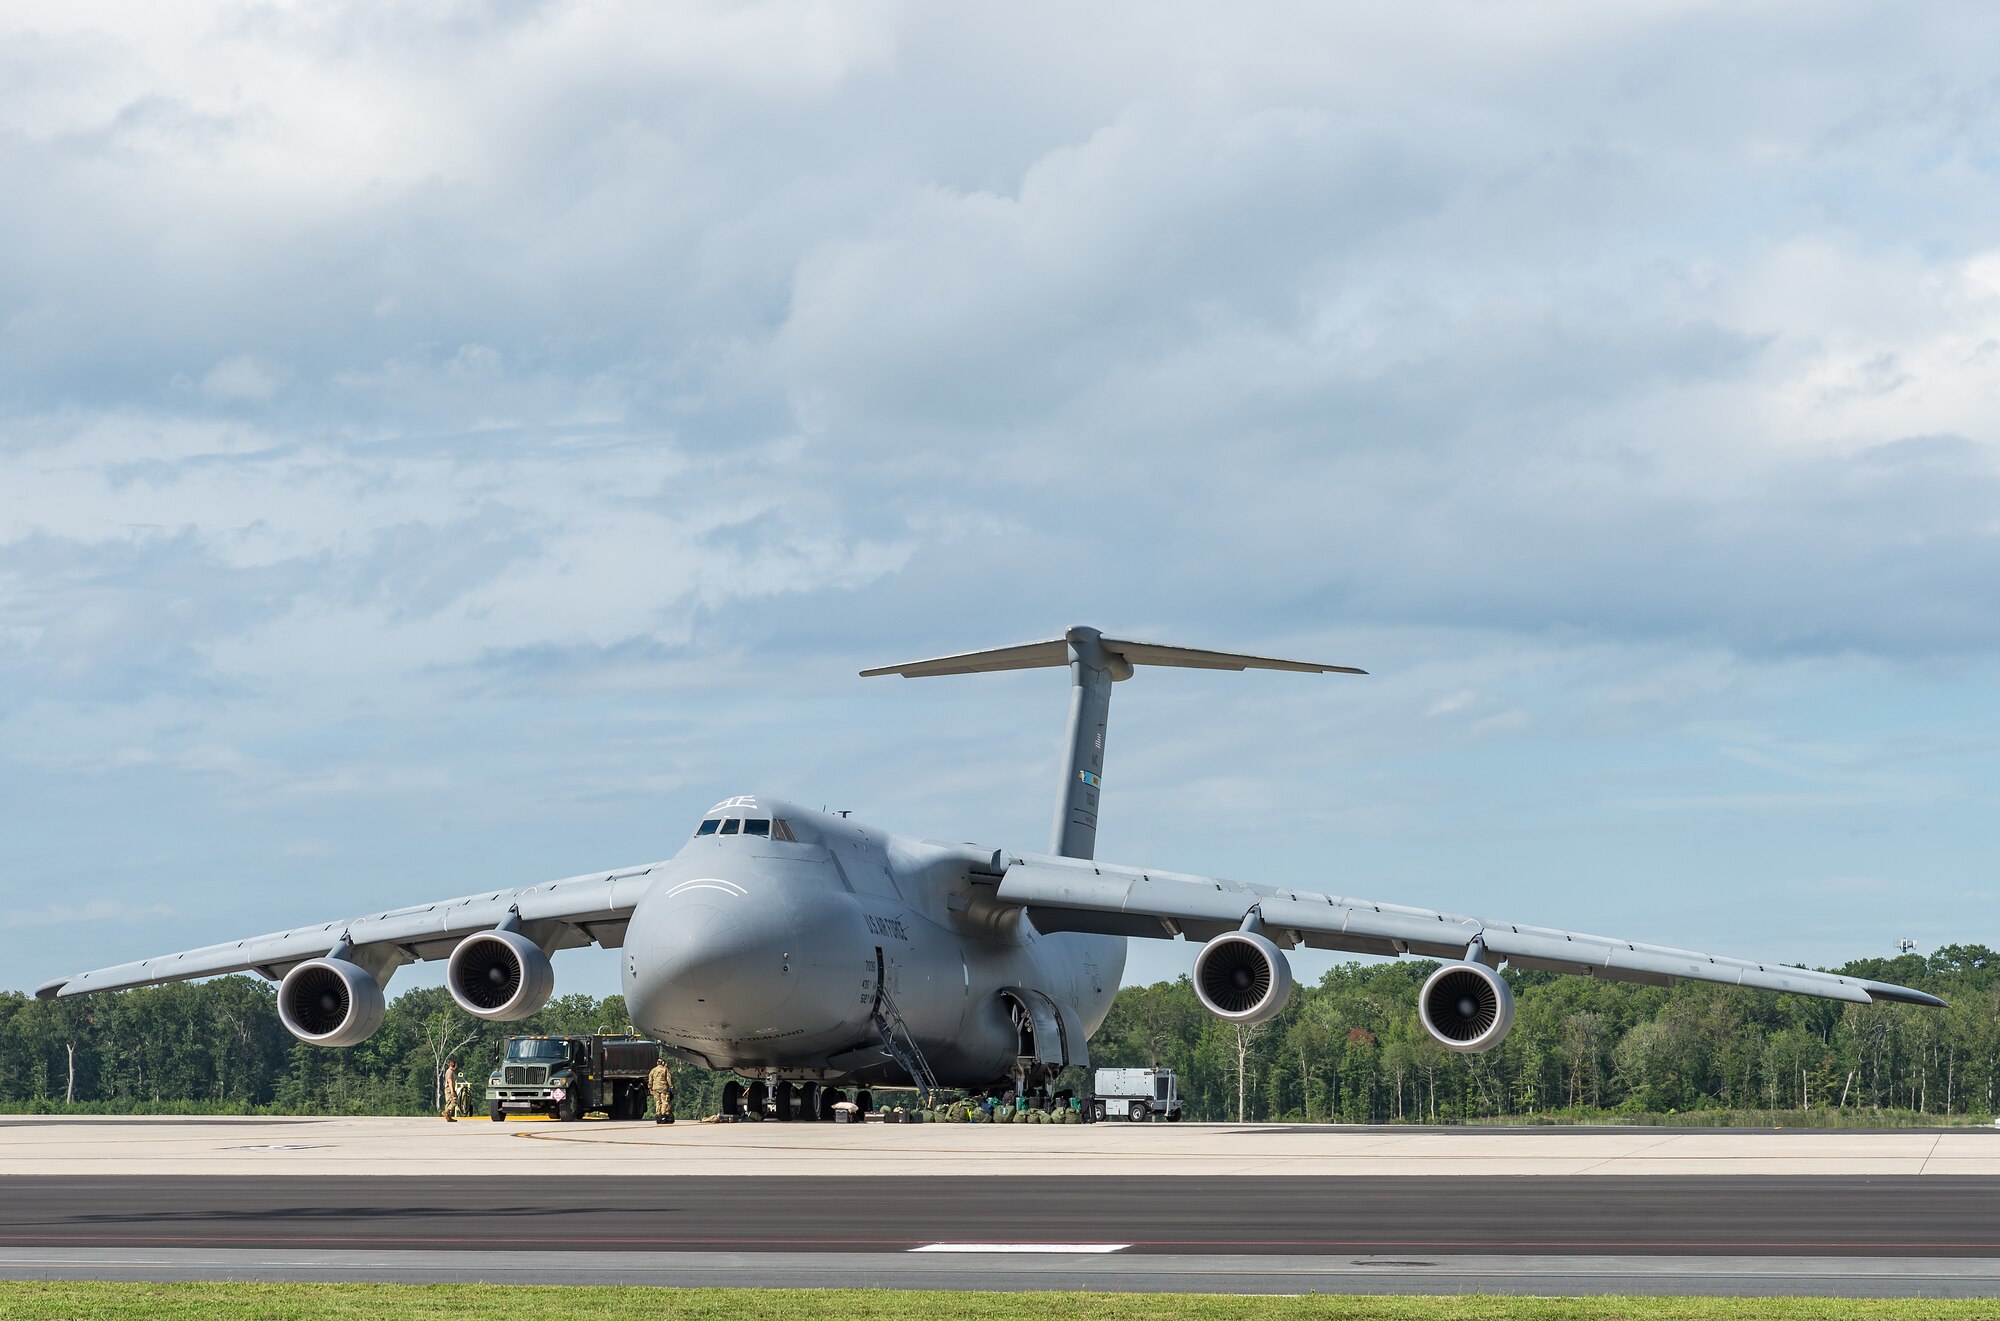 Personnel from the 436th Aircraft Maintenance and 436th Logistics Readiness Squadrons refuel a C-5M Super Galaxy prior to its departure from Dover Air Force Base, Delaware, Aug. 18, 2021. The C-5M is a strategic transport aircraft and is the largest aircraft in the U.S. Air Force inventory. (U.S. Air Force photo by Roland Balik)